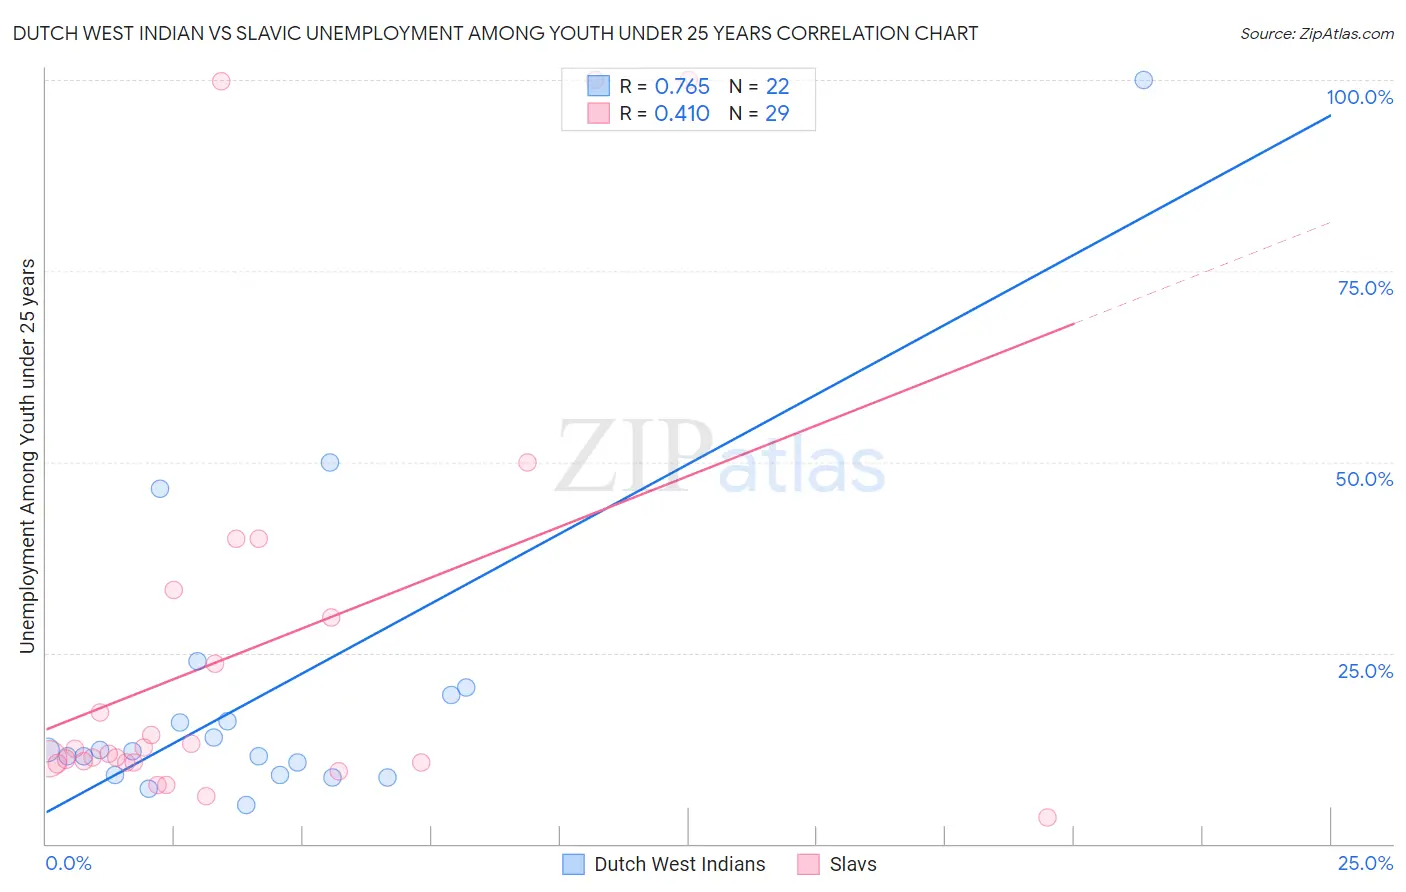 Dutch West Indian vs Slavic Unemployment Among Youth under 25 years